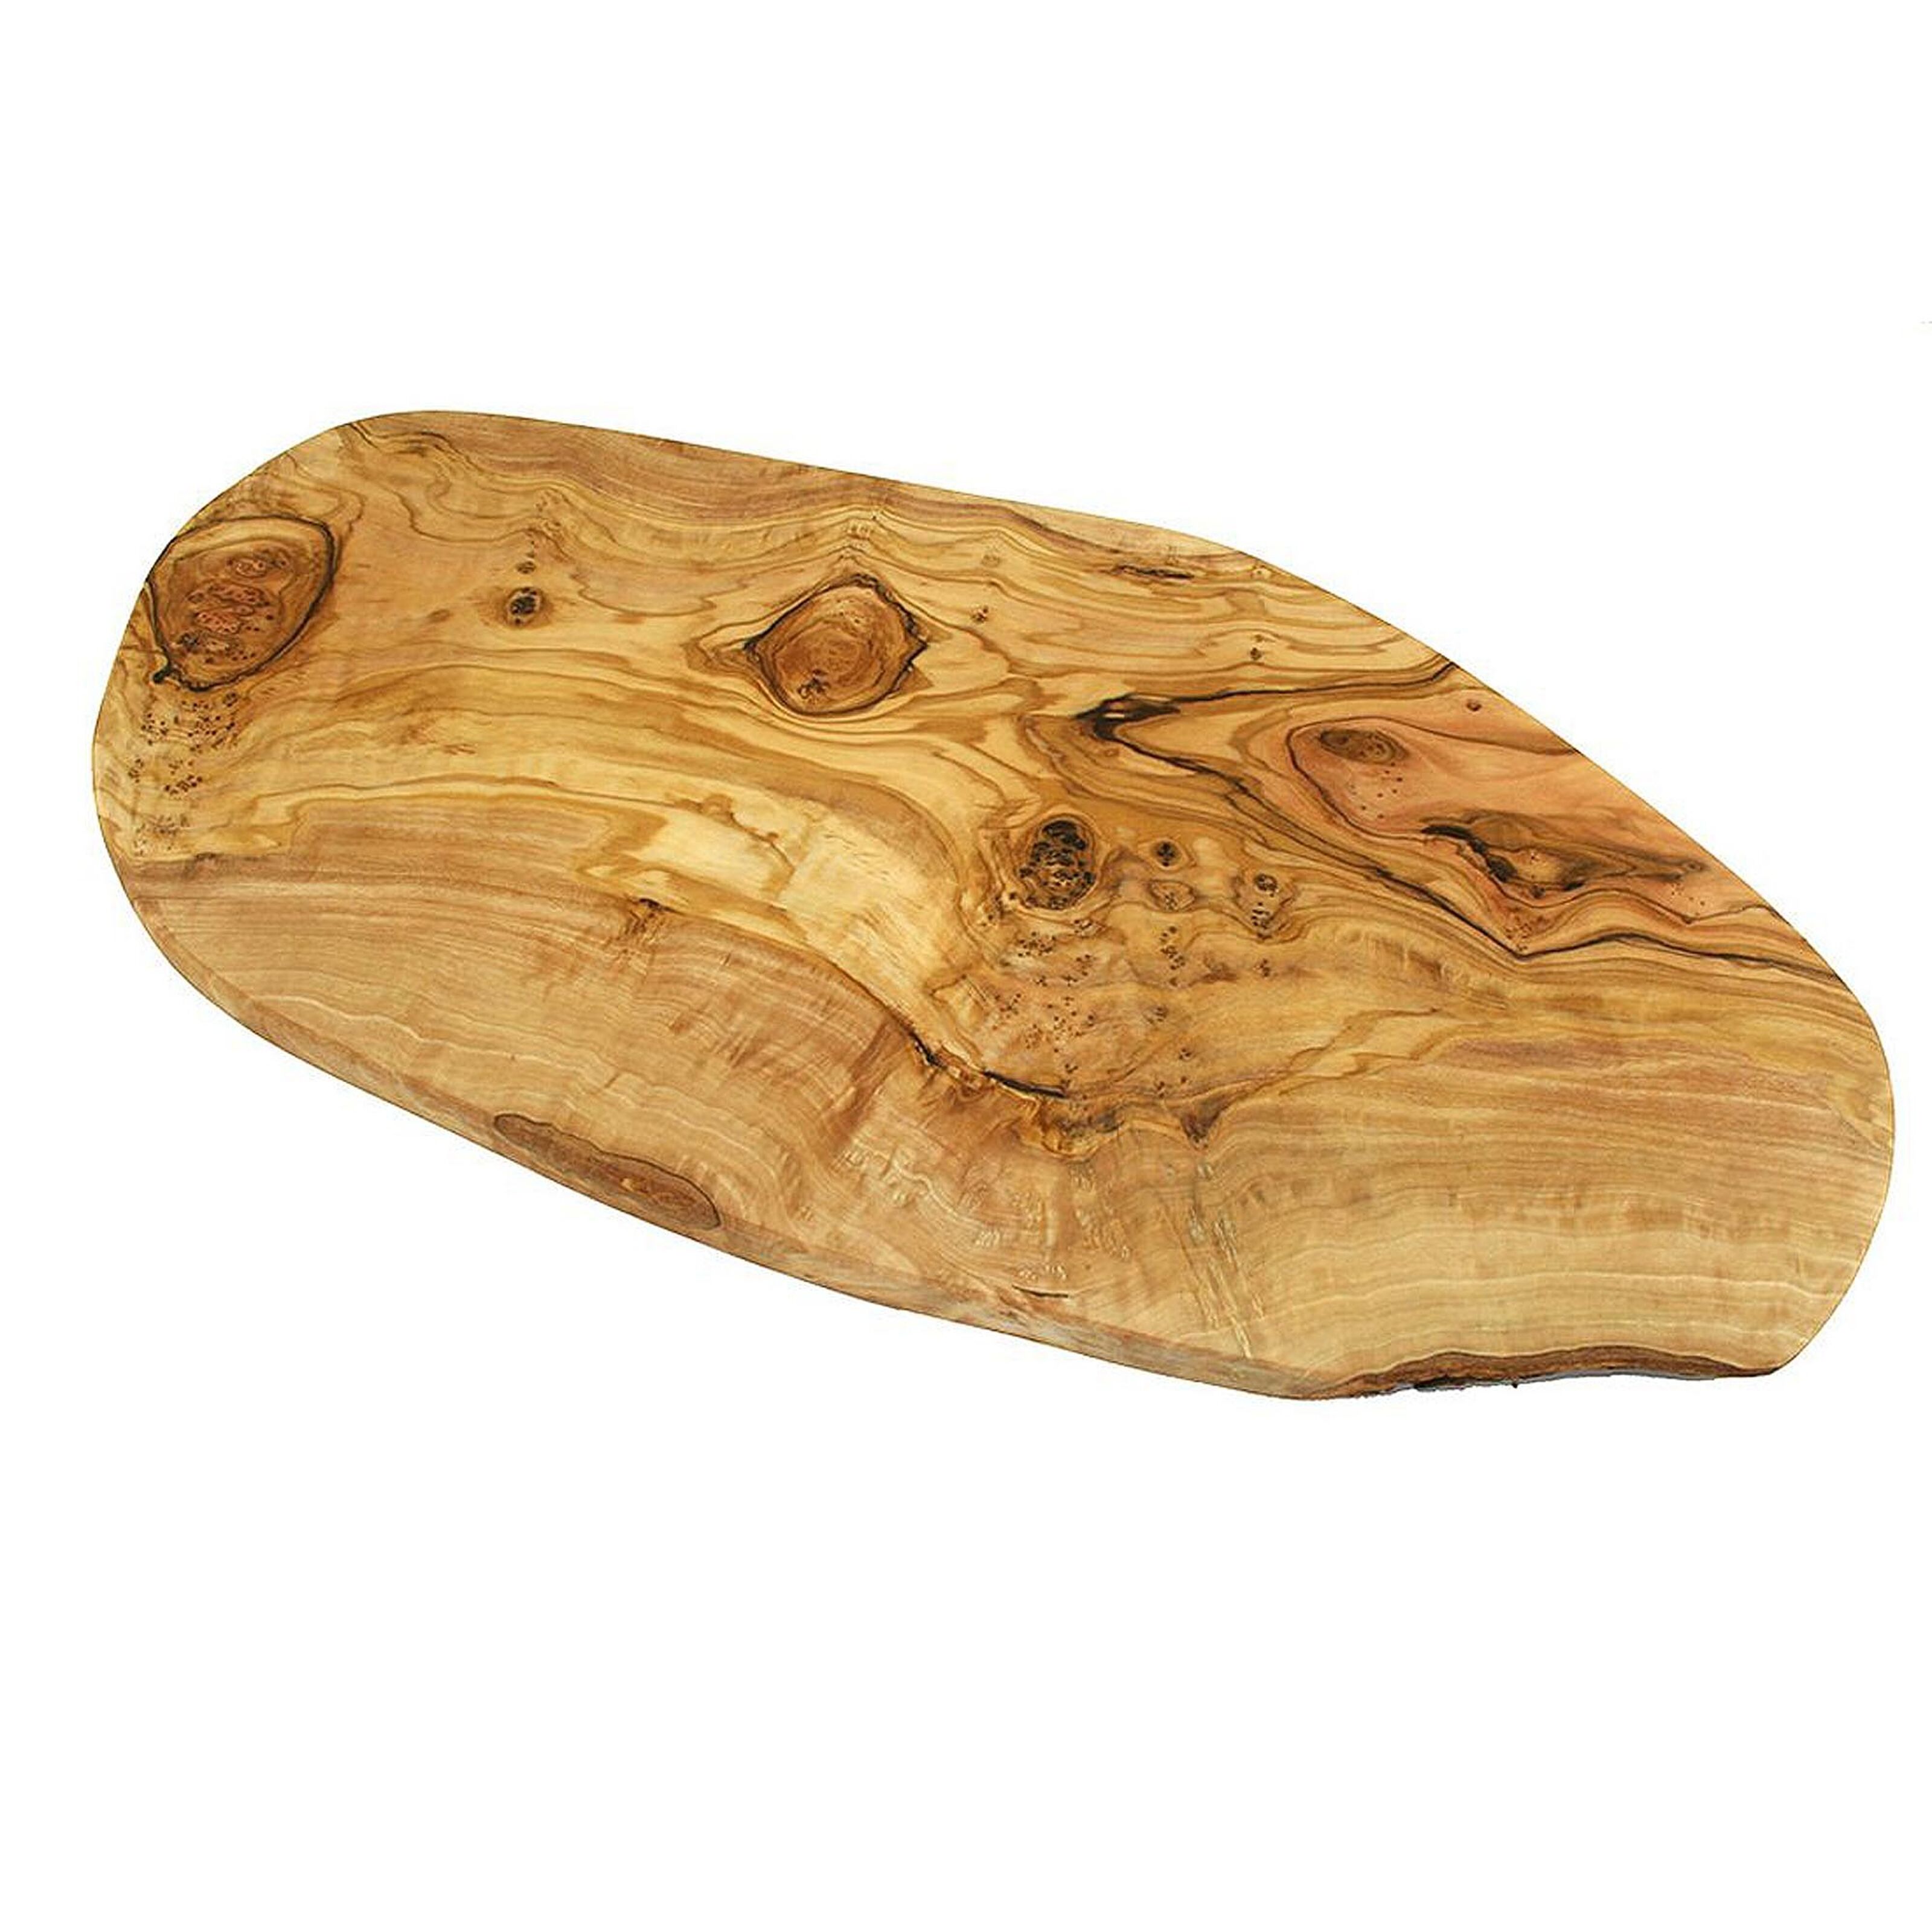 Buy wholesale RUSTIC - 25 approx. 29 cm), cutting (length: board serving or wood olive